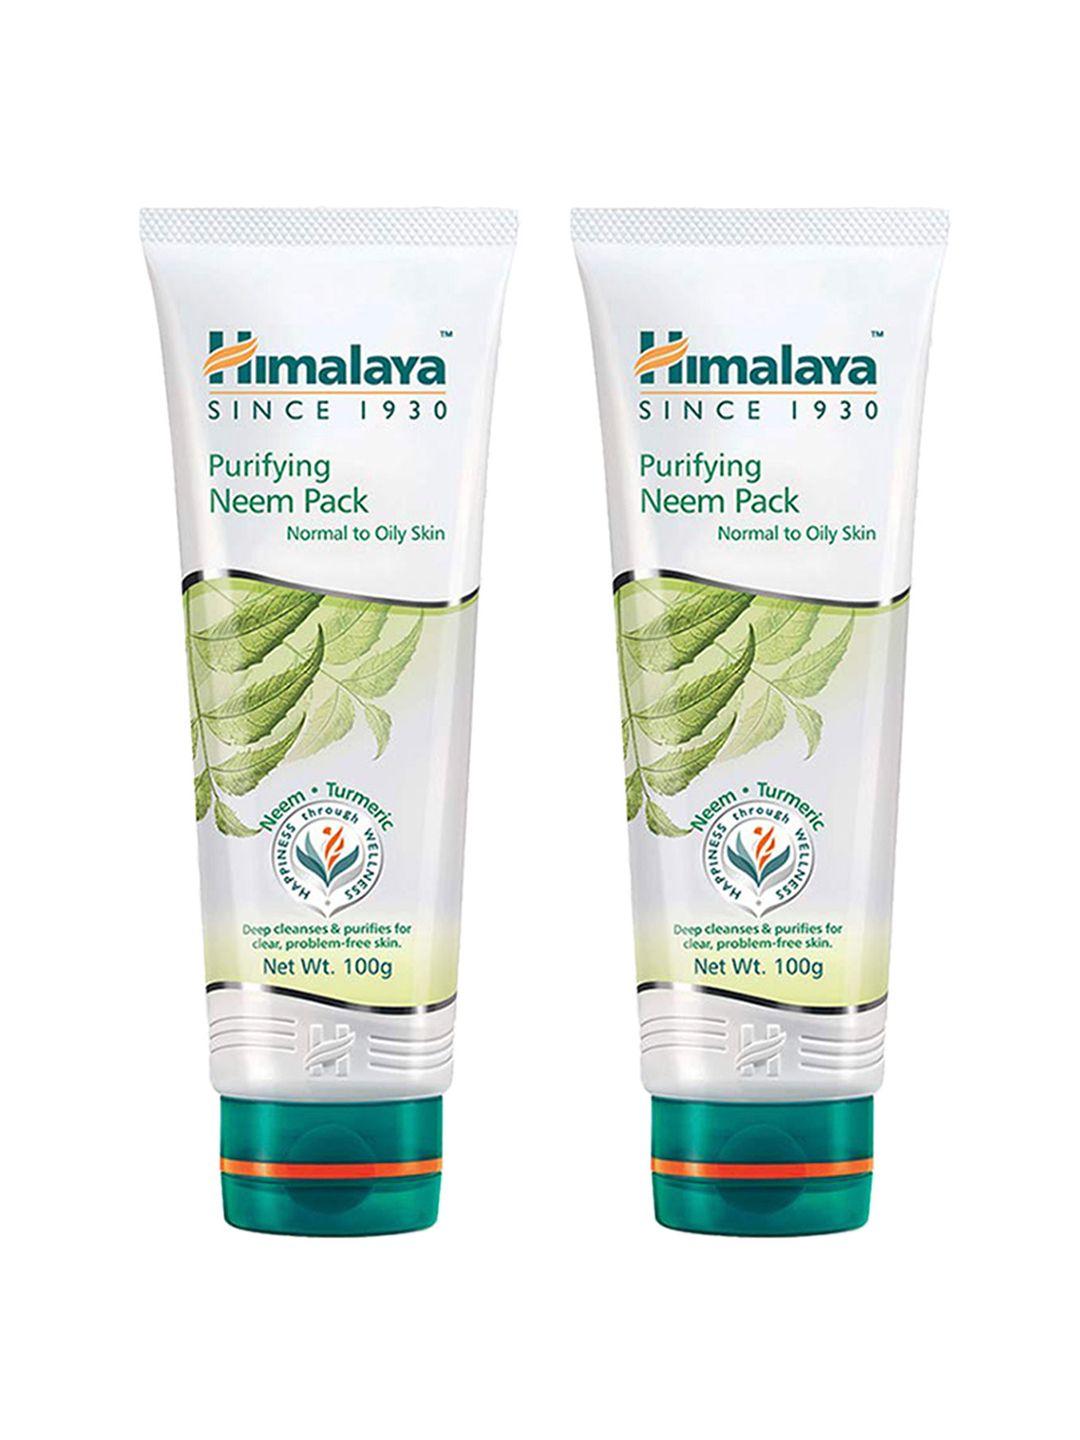 himalaya set of 2 purifying neem face pack with turmeric for oily skin - 100g each